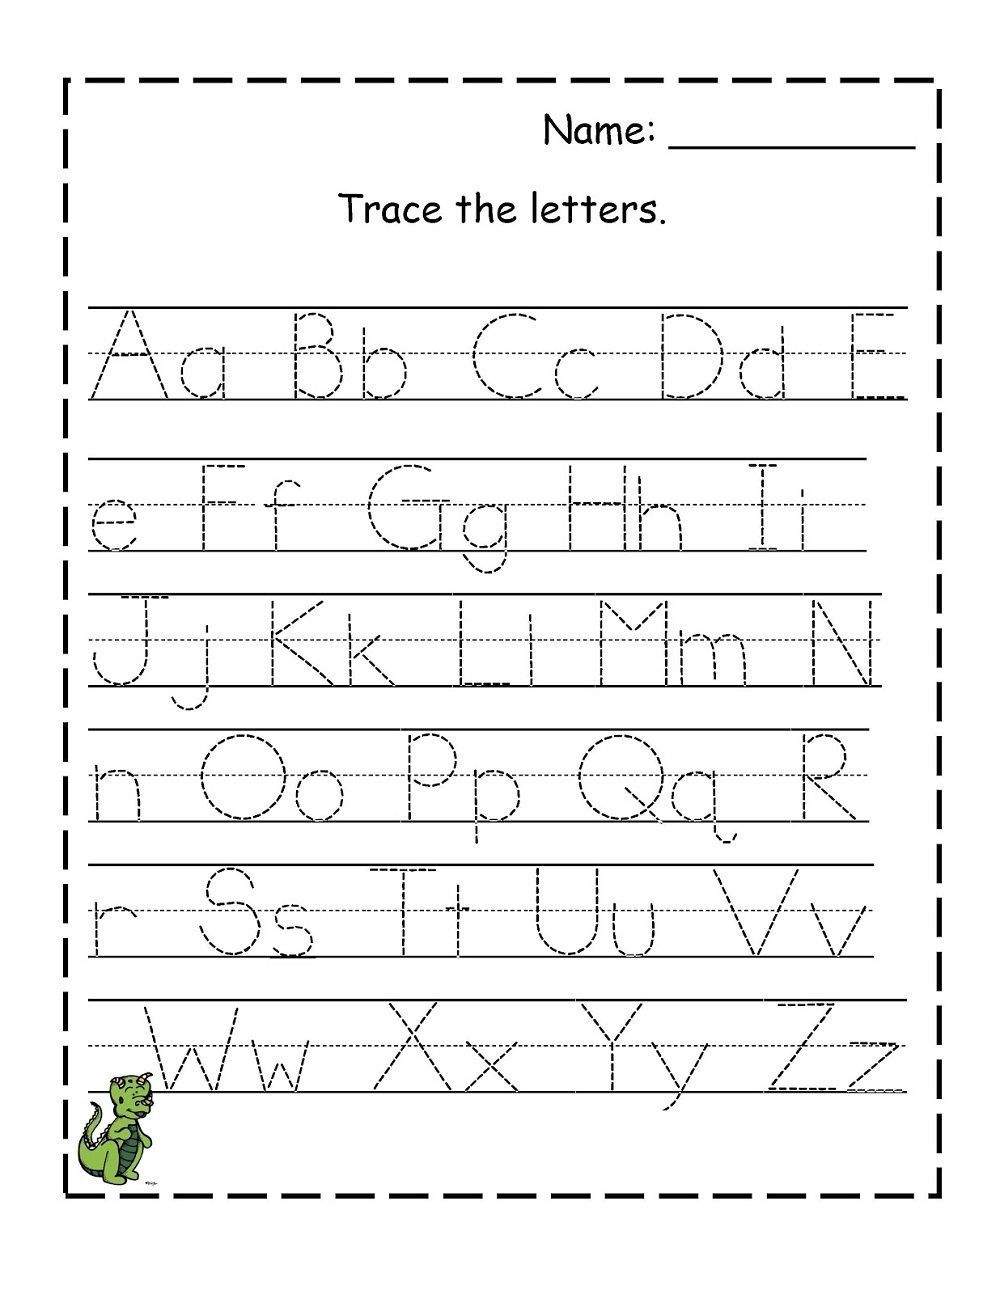 Tracing Letters Worksheets For Practice | Alphabet